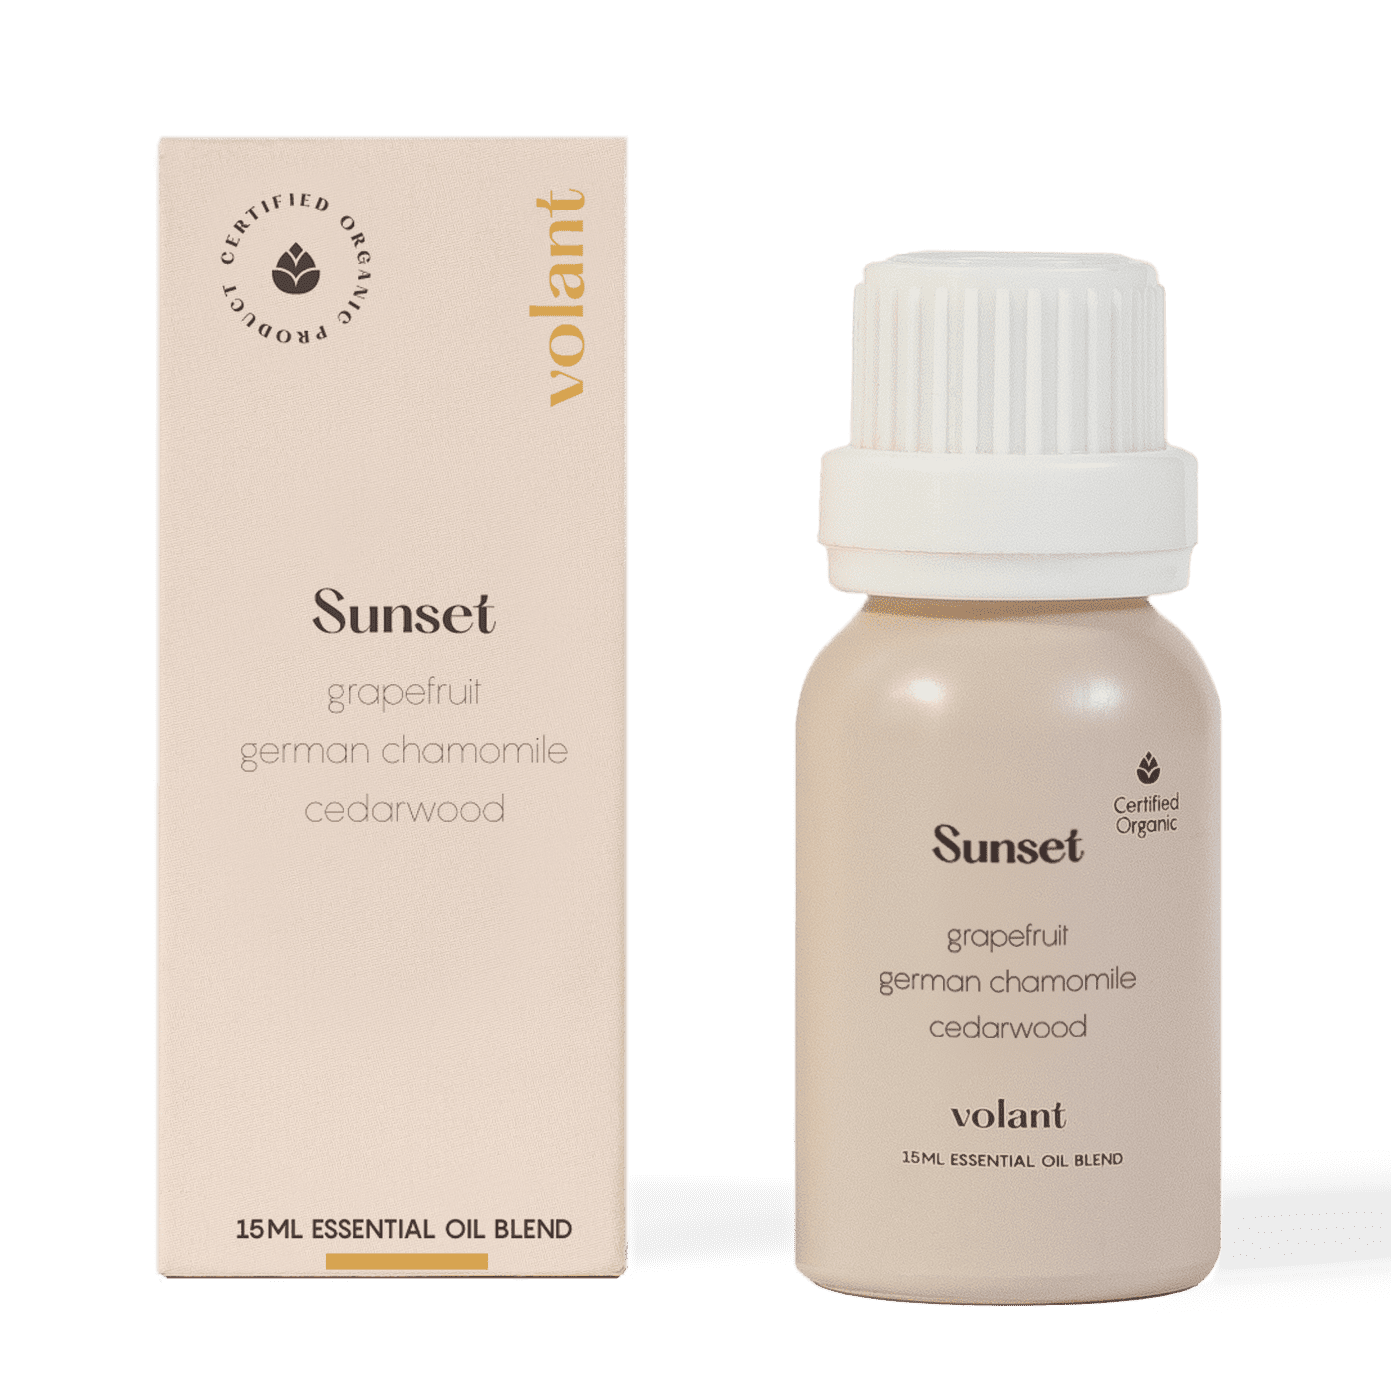 volant sunset essential oil blend bottle packaging. Made from pure Cedarwood, German Chamomile and Grapefruit, it is inspired by dreaming, sunsets, and refreshing breezes. 